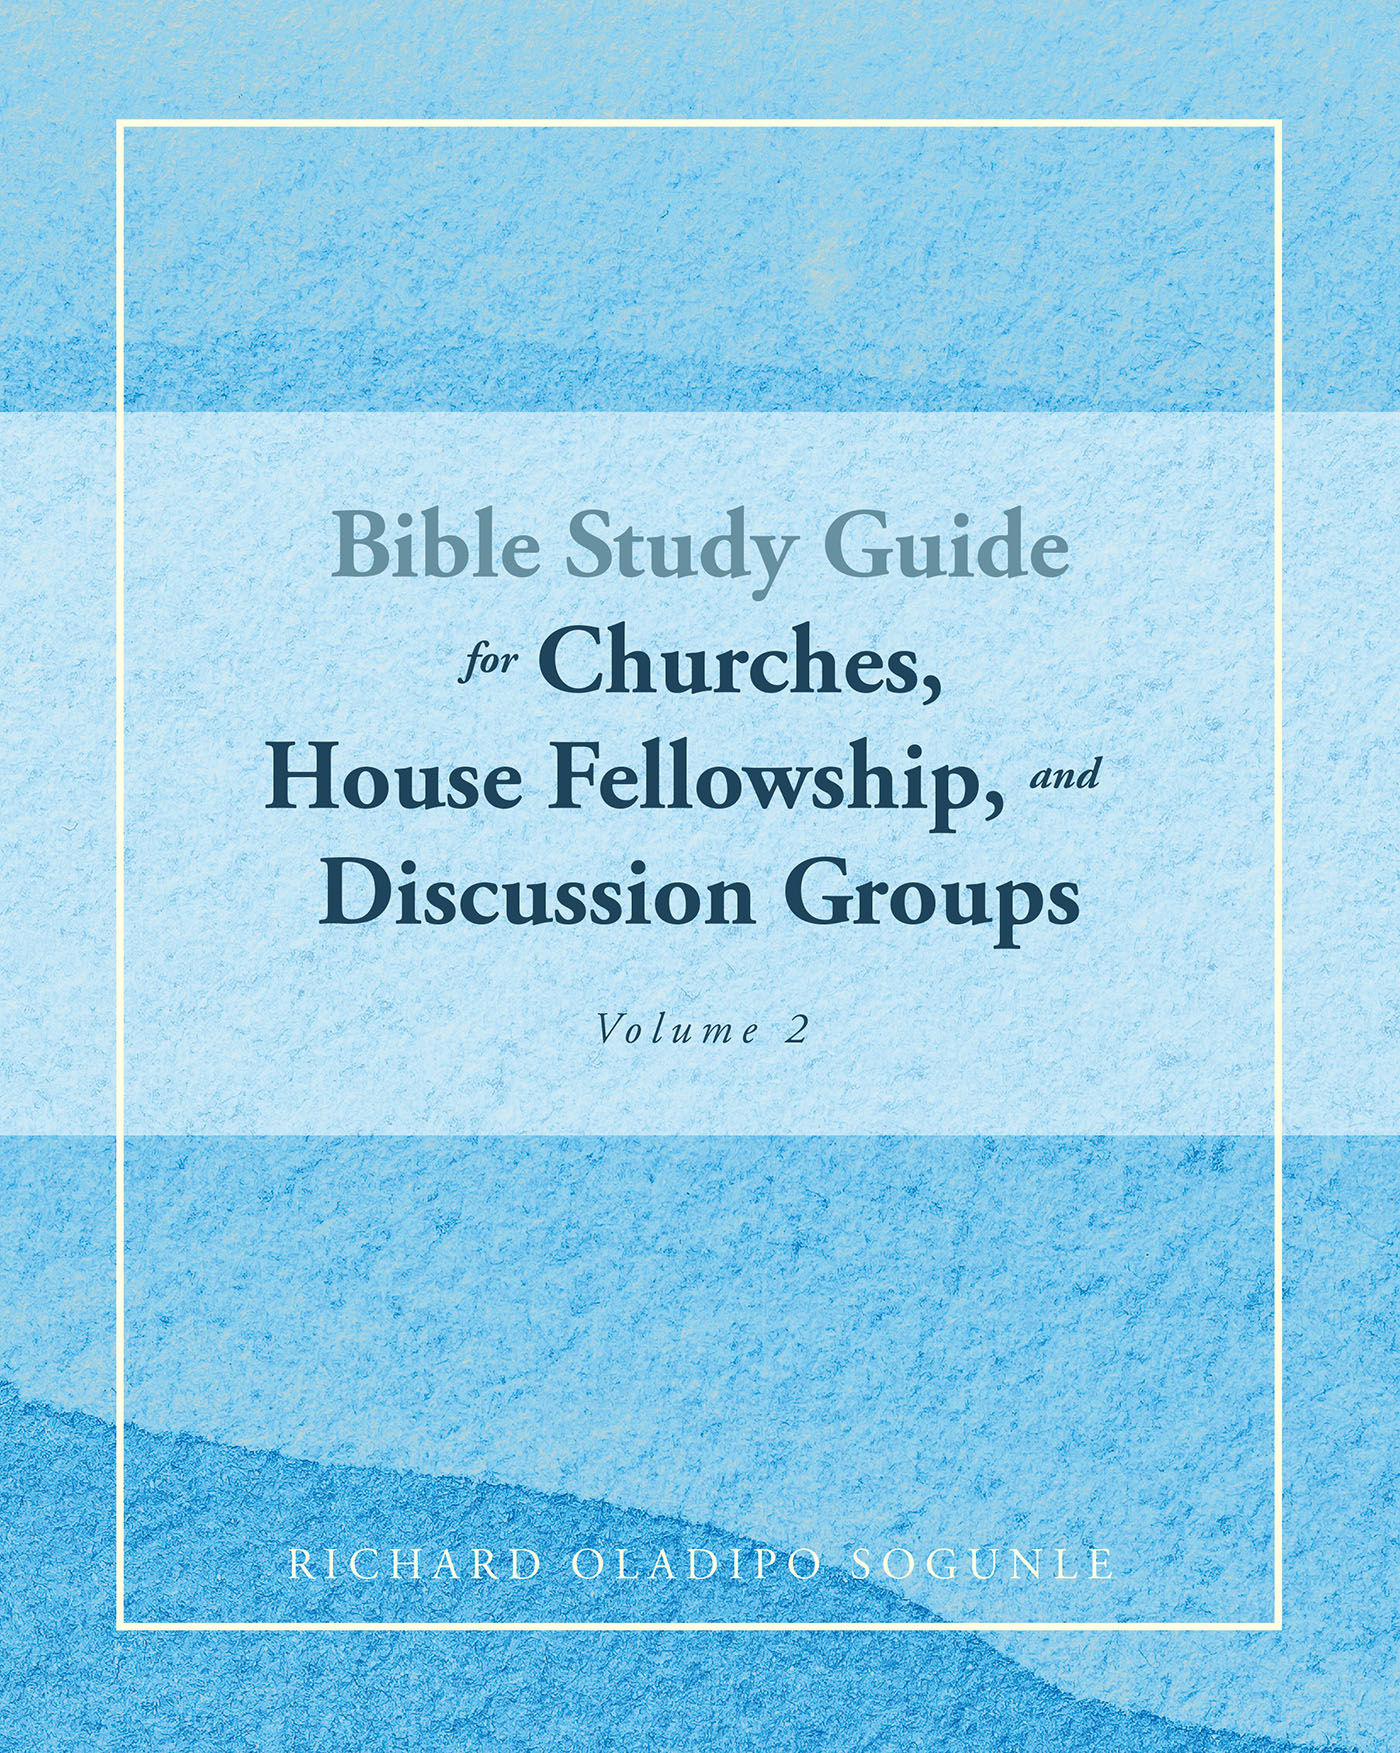 Richard Oladipo Sogunle’s Newly Released “BIBLE STUDY GUIDE for Churches, House Fellowship, and Discussion Groups: Volume 2” is a Helpful Pastoral Resource